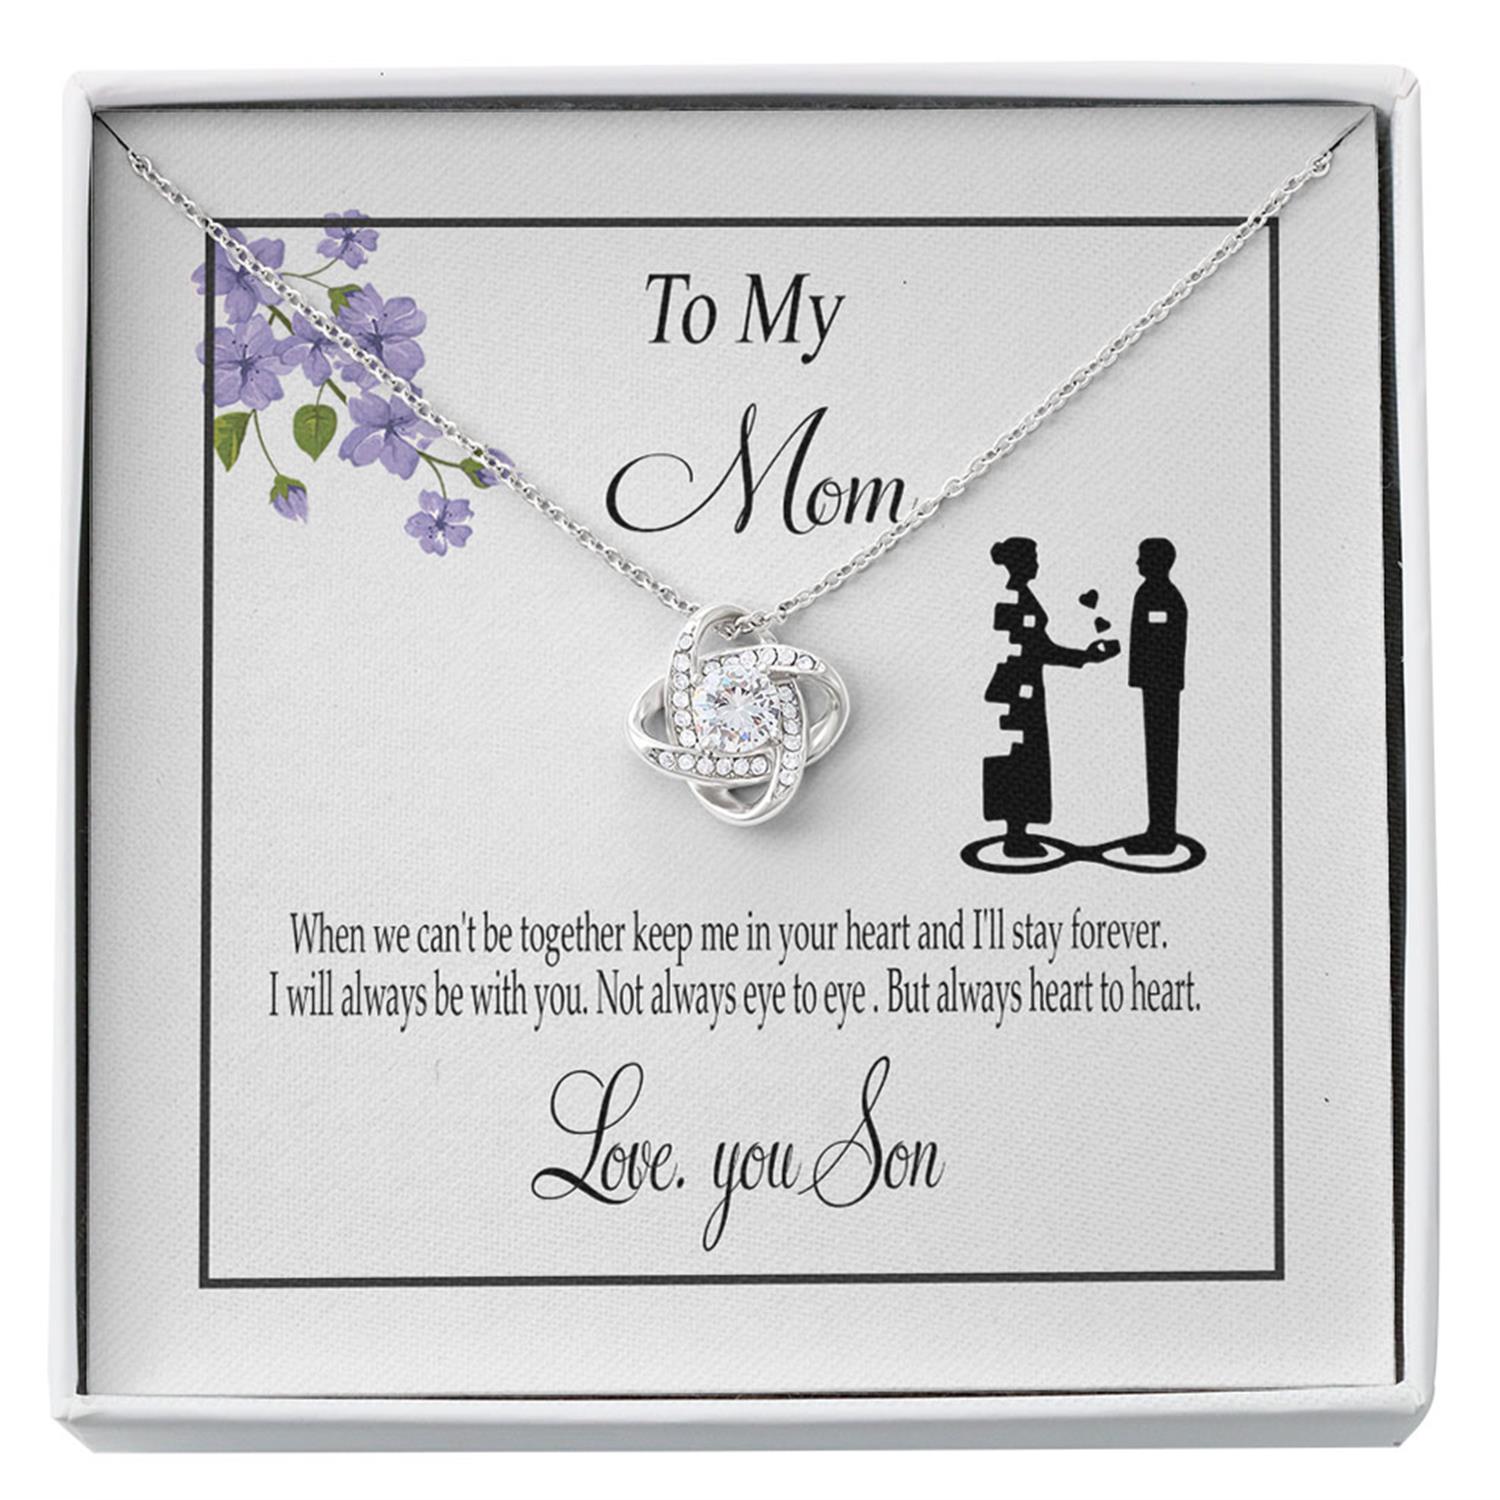 Mom Necklace - To My Mom - Necklace With Gift Box For Christmas Custom Necklace